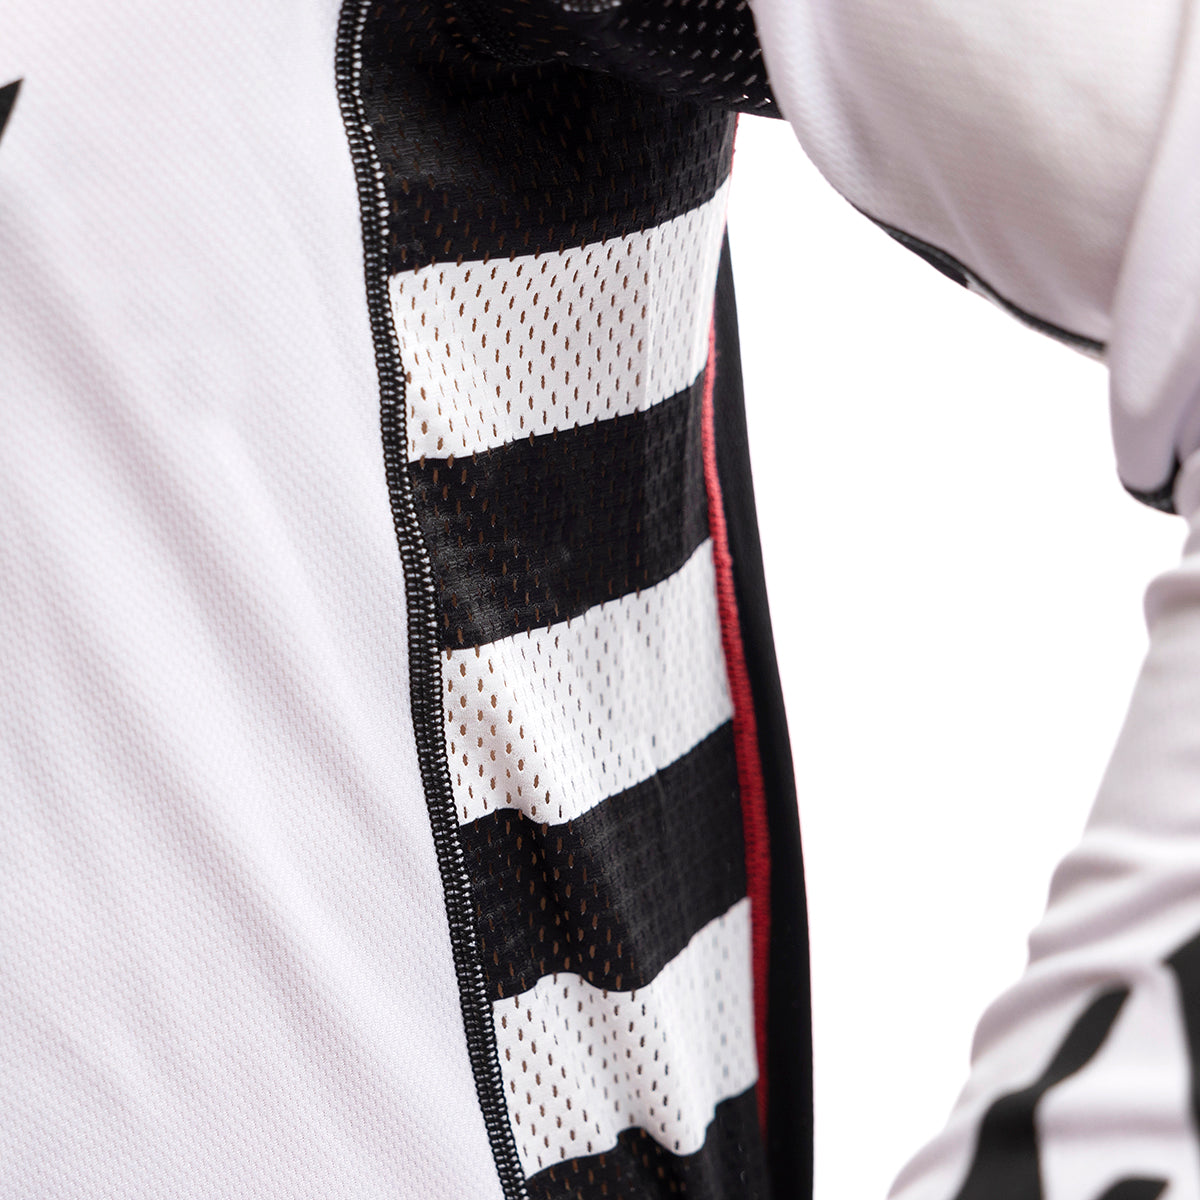 USA Grindhouse Factor Jersey - White/Black